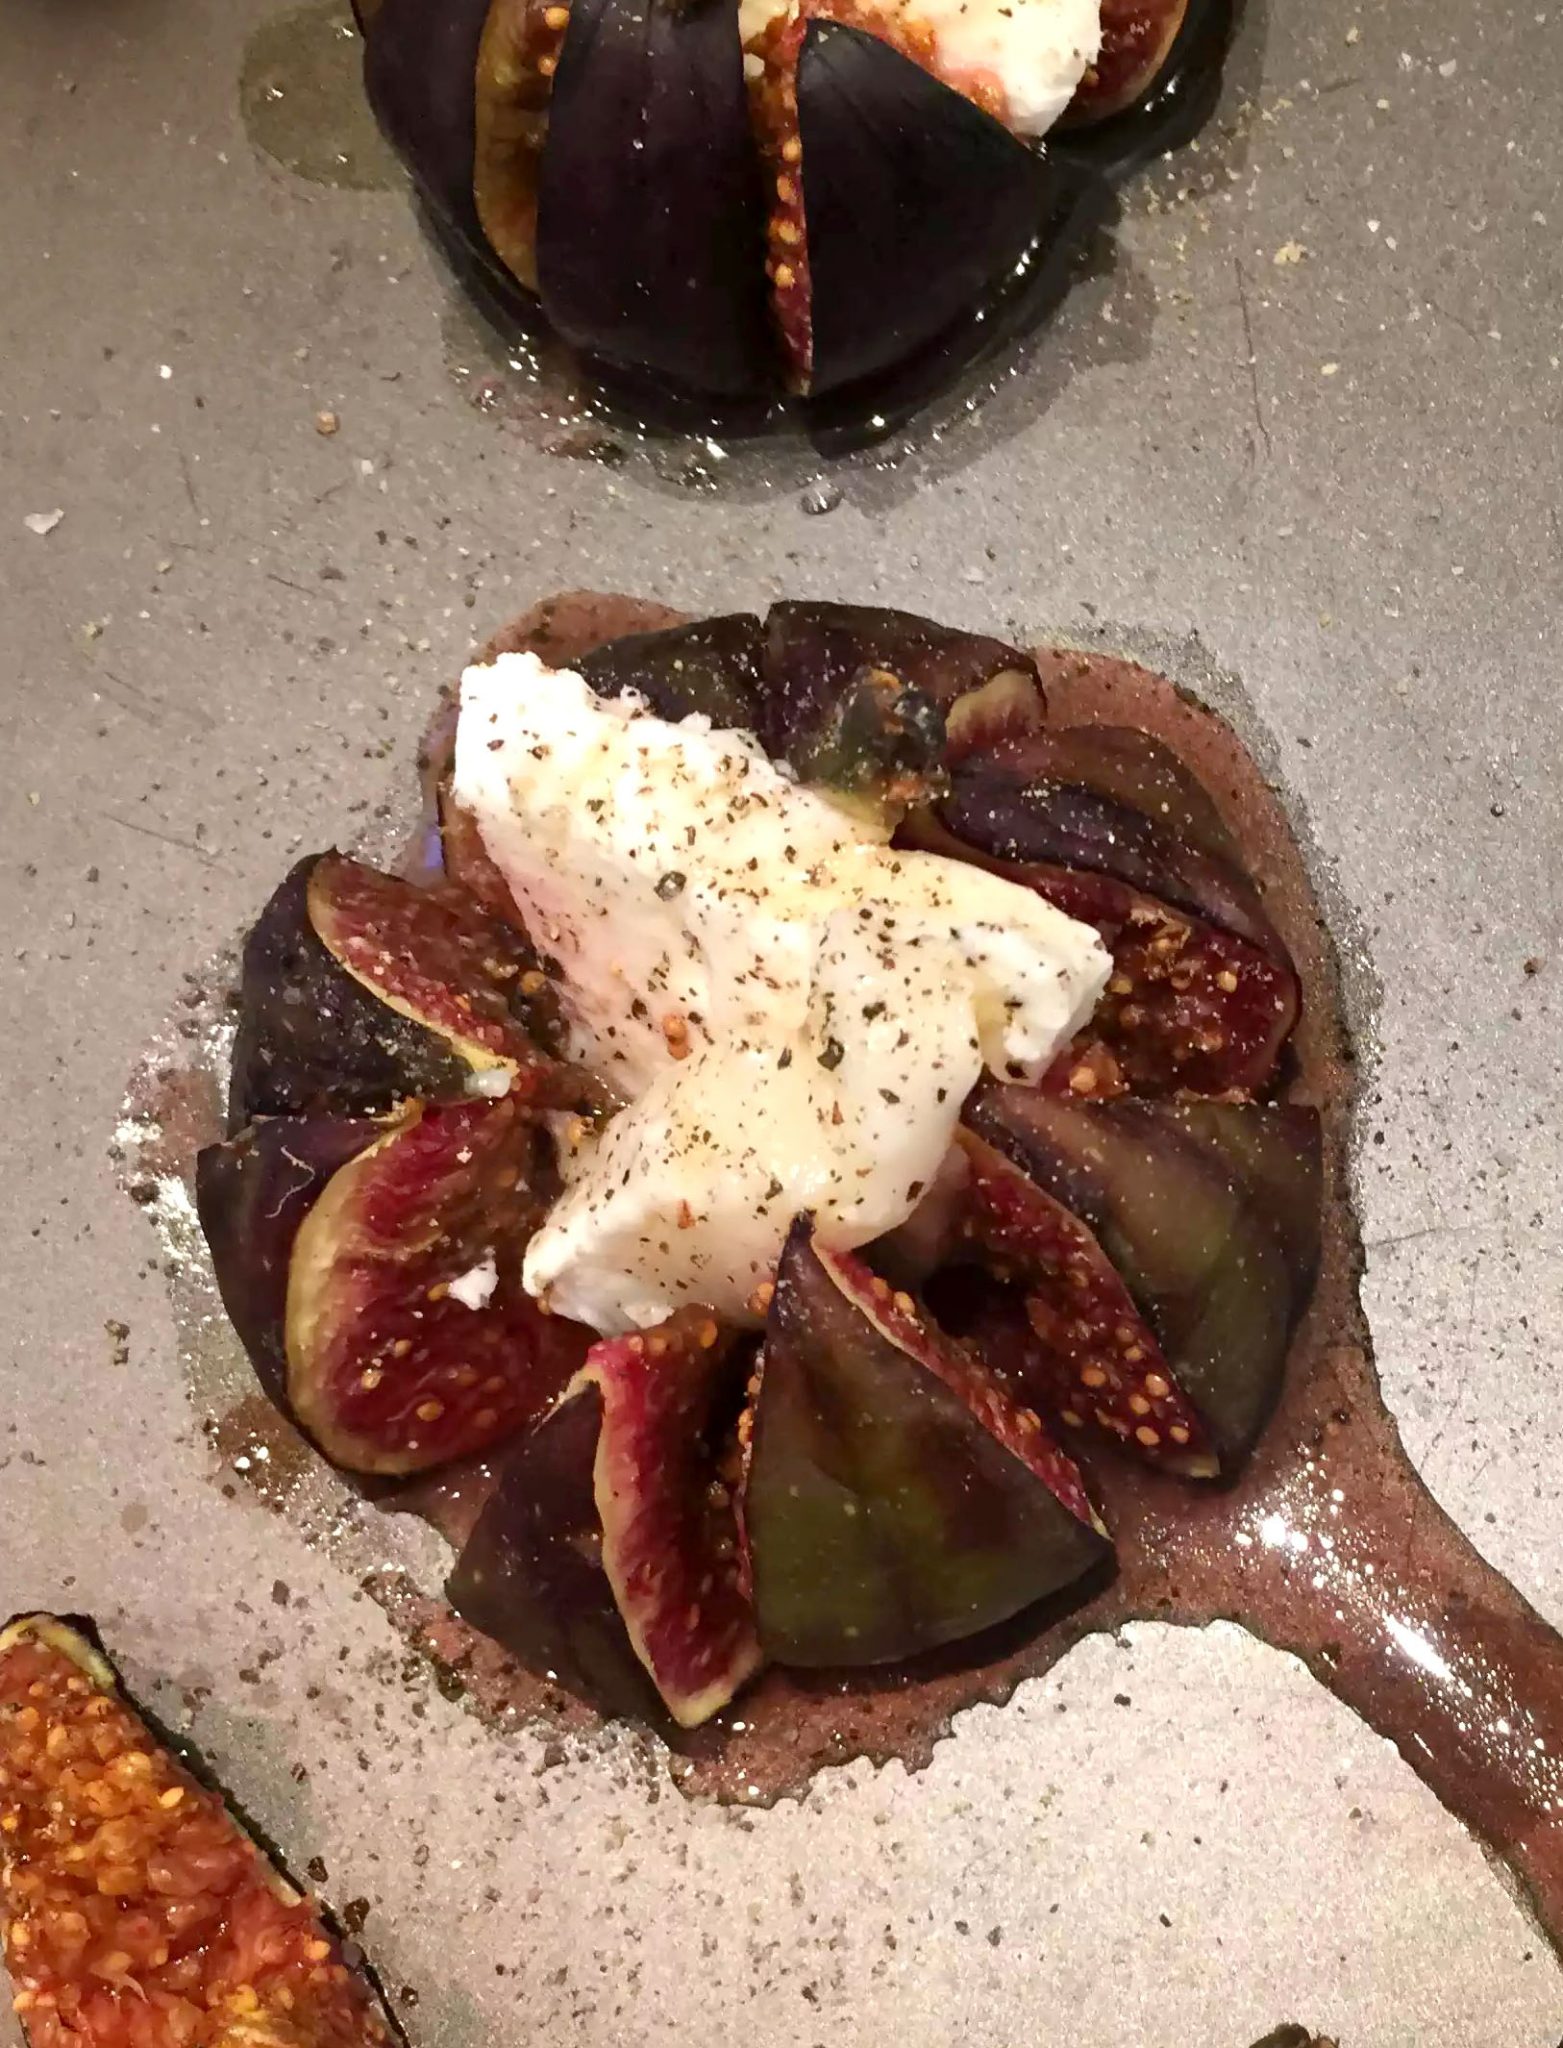 Baked Figs with Goats Cheese & Crispy Prosciutto & pecans - Appetiser, SCD, Paleo, Gluten-Free, Grain-Free, Refined Sugar-Free, Clean Eating